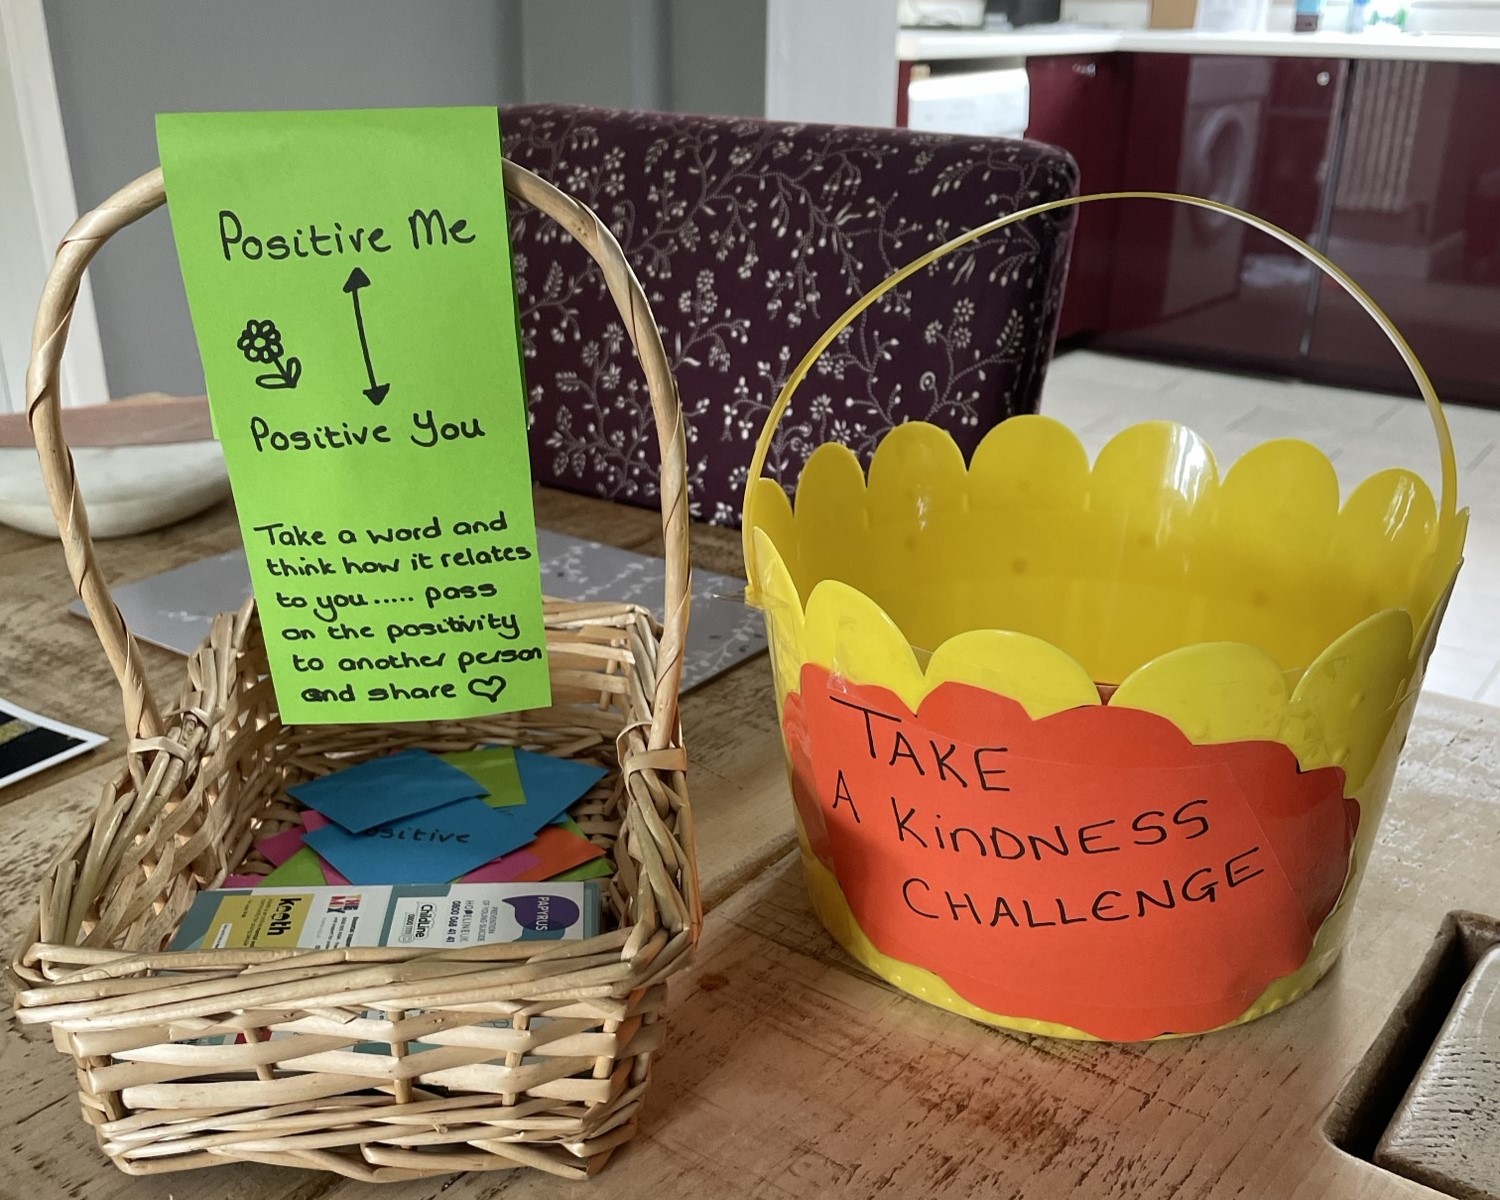 A wicker basket filled with notes and a yellow bucket. The bucket has a label: "Take a kindness challenge". The basket has a message attached: "Positive Me, Positive Y ou. Take a word and think how it relates to you... Pass on the positivity to another person and share"